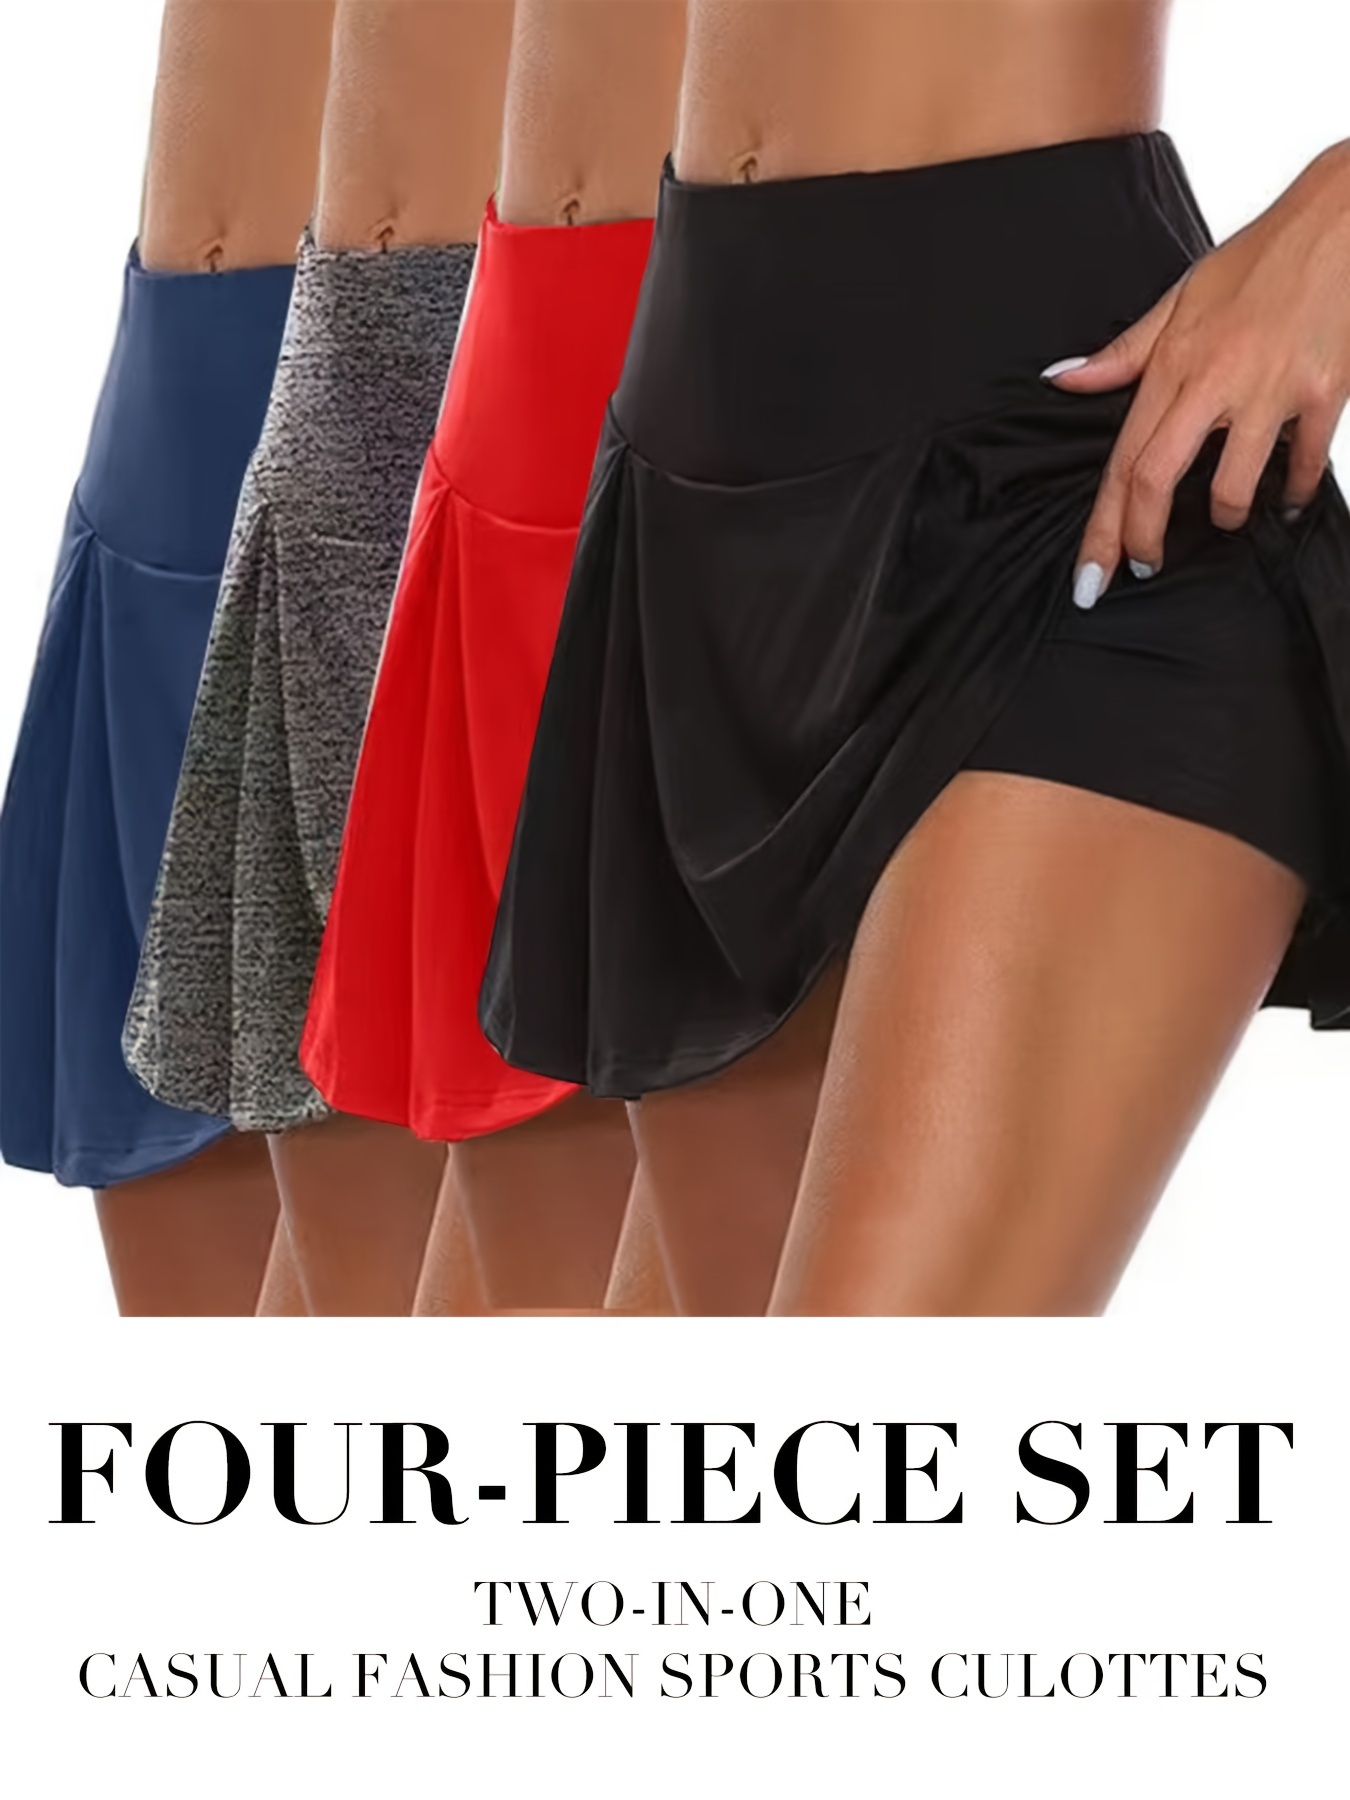 Women Sporty Tennis Beach Skirt Outfit Athletic Running Pleated Skirt with  Shorts Yoga Badminton Skirts Ladies Dress - China Yoga and Gym price